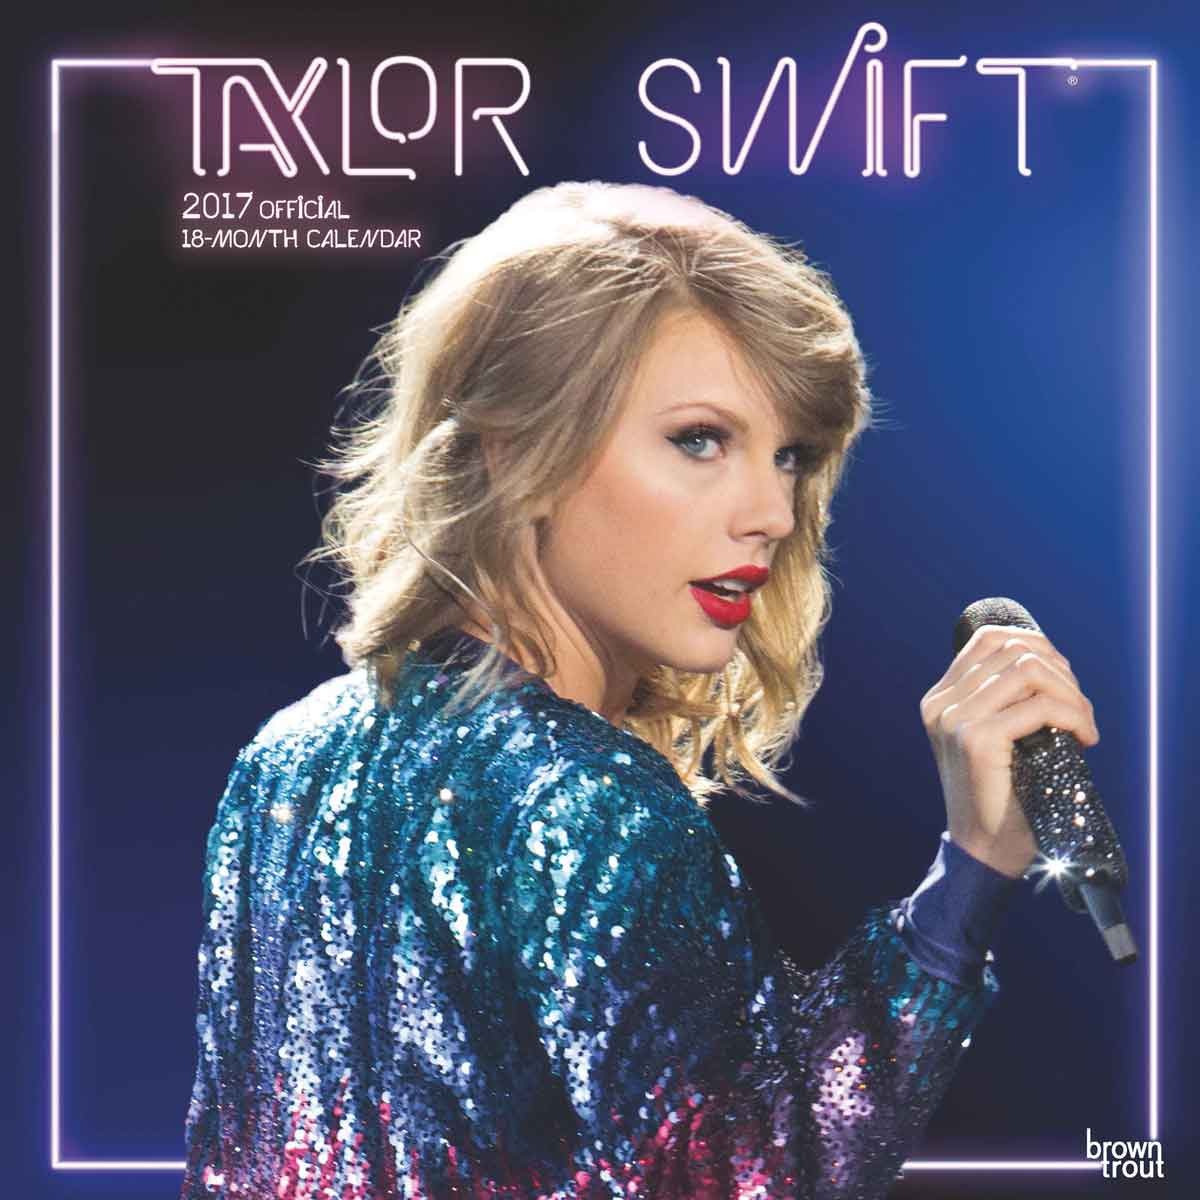 Taylor Swift - Calendars 2020 on UKposters/EuroPosters1200 x 1200